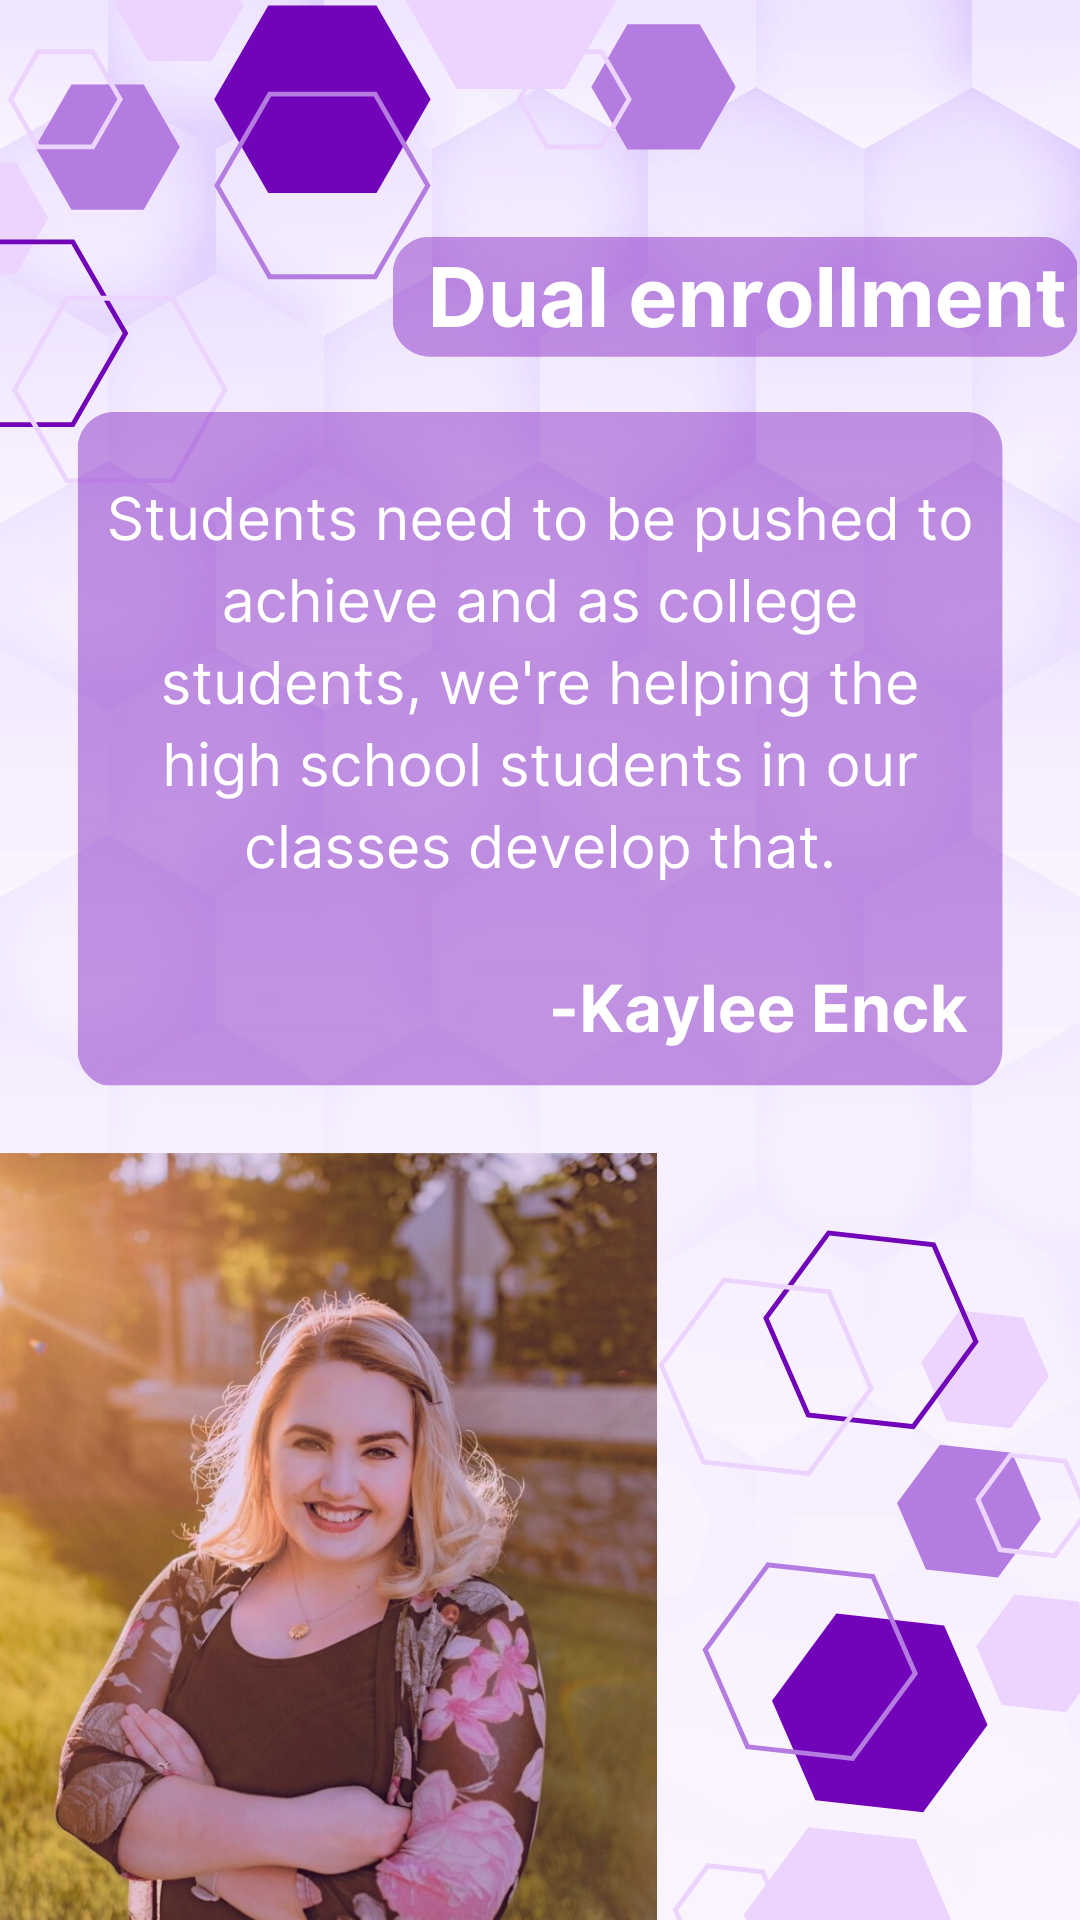 Quote from dual enrolled student "Students need to be pushed to achieve and as college students, we're helping the high school students in our classes develop that." Kaylee Enck